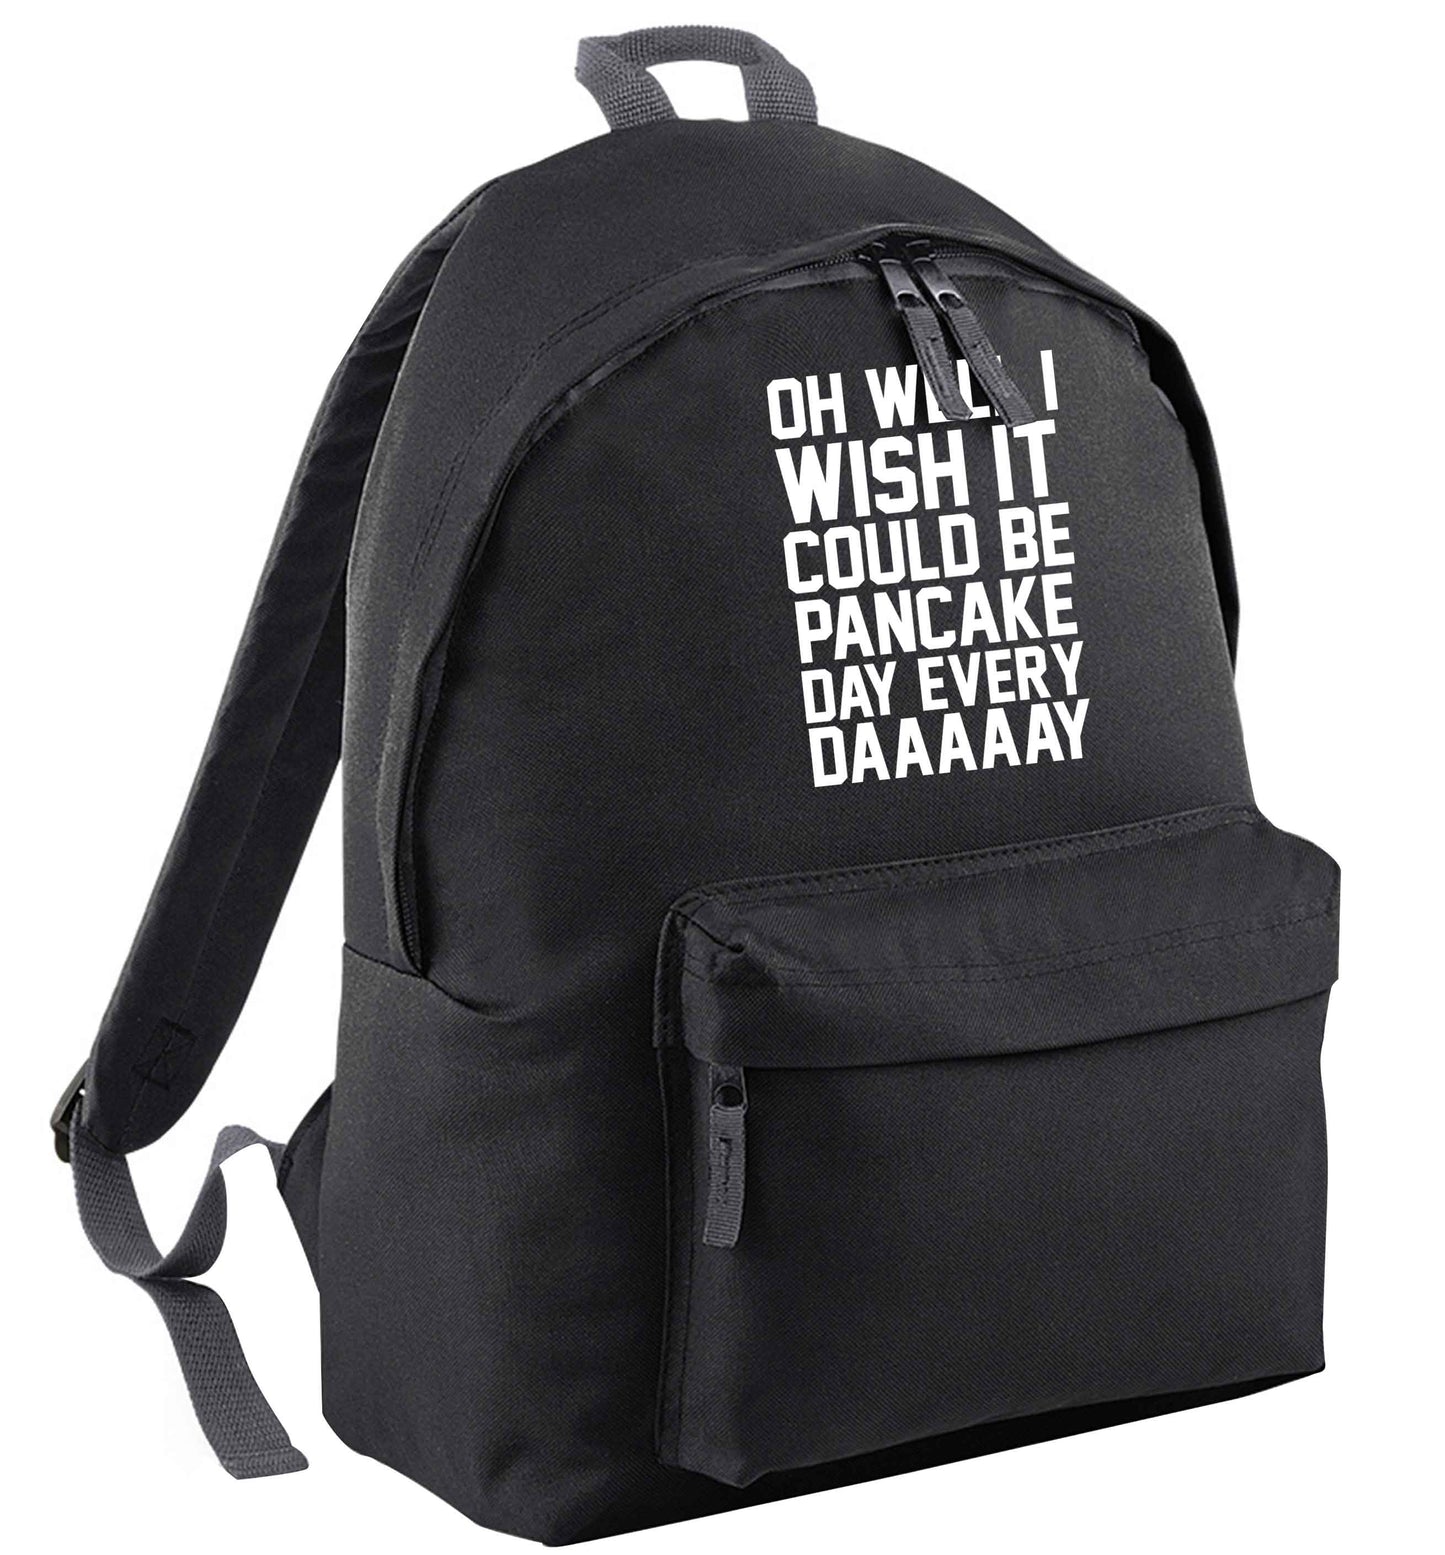 Oh well I wish it could be pancake day every day | Adults backpack